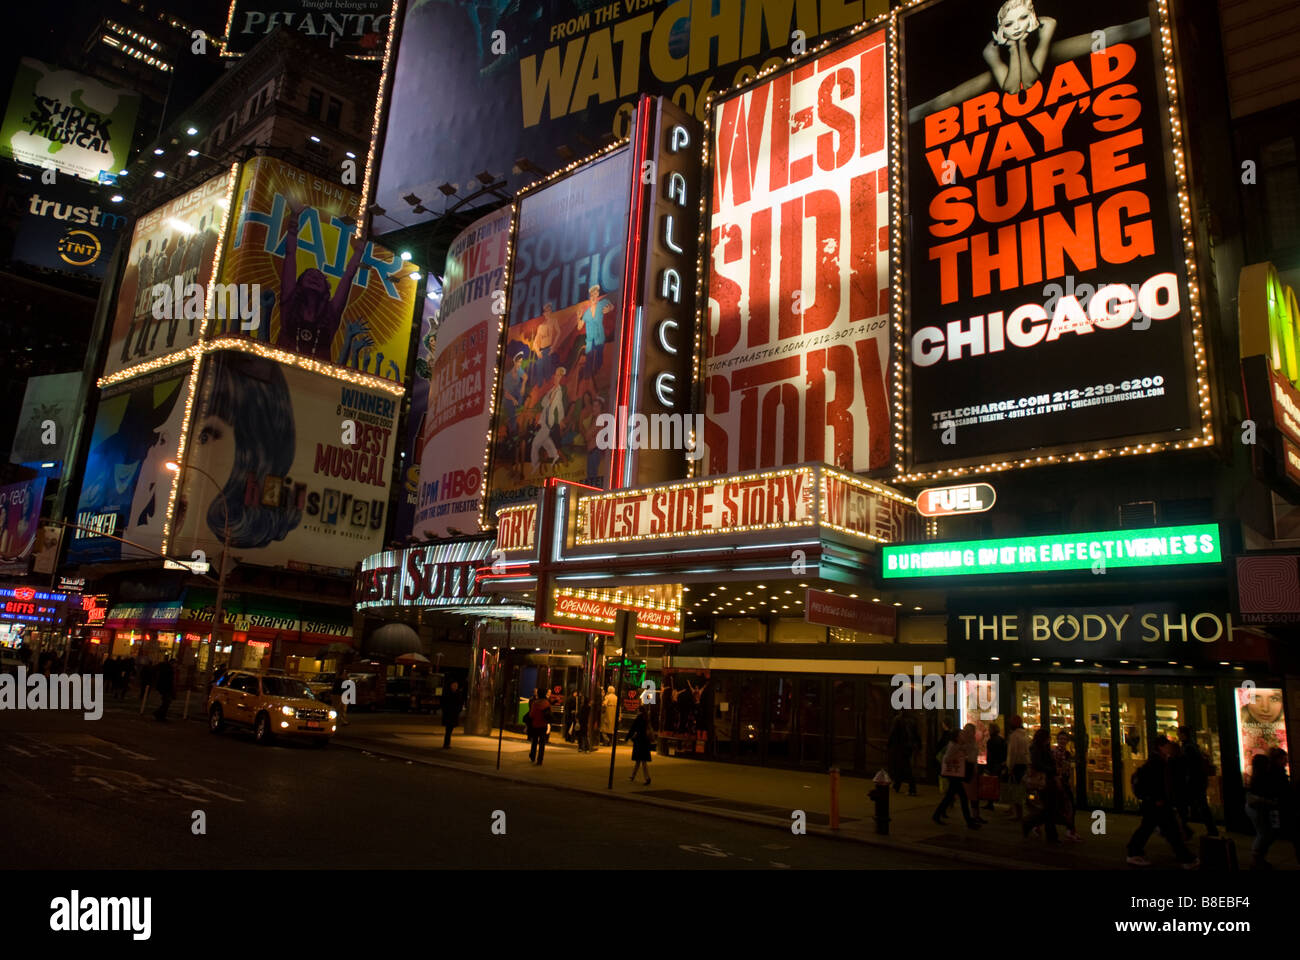 Broadway shows advertised on Times Square billboard